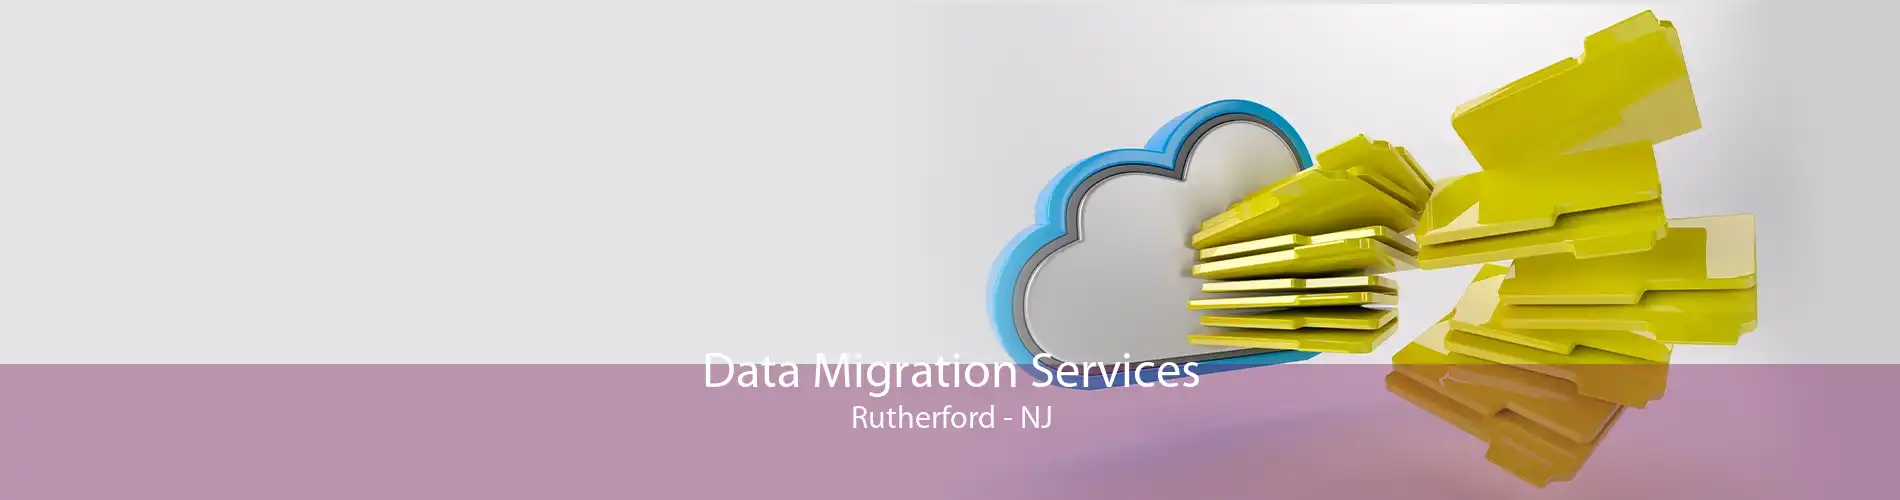 Data Migration Services Rutherford - NJ